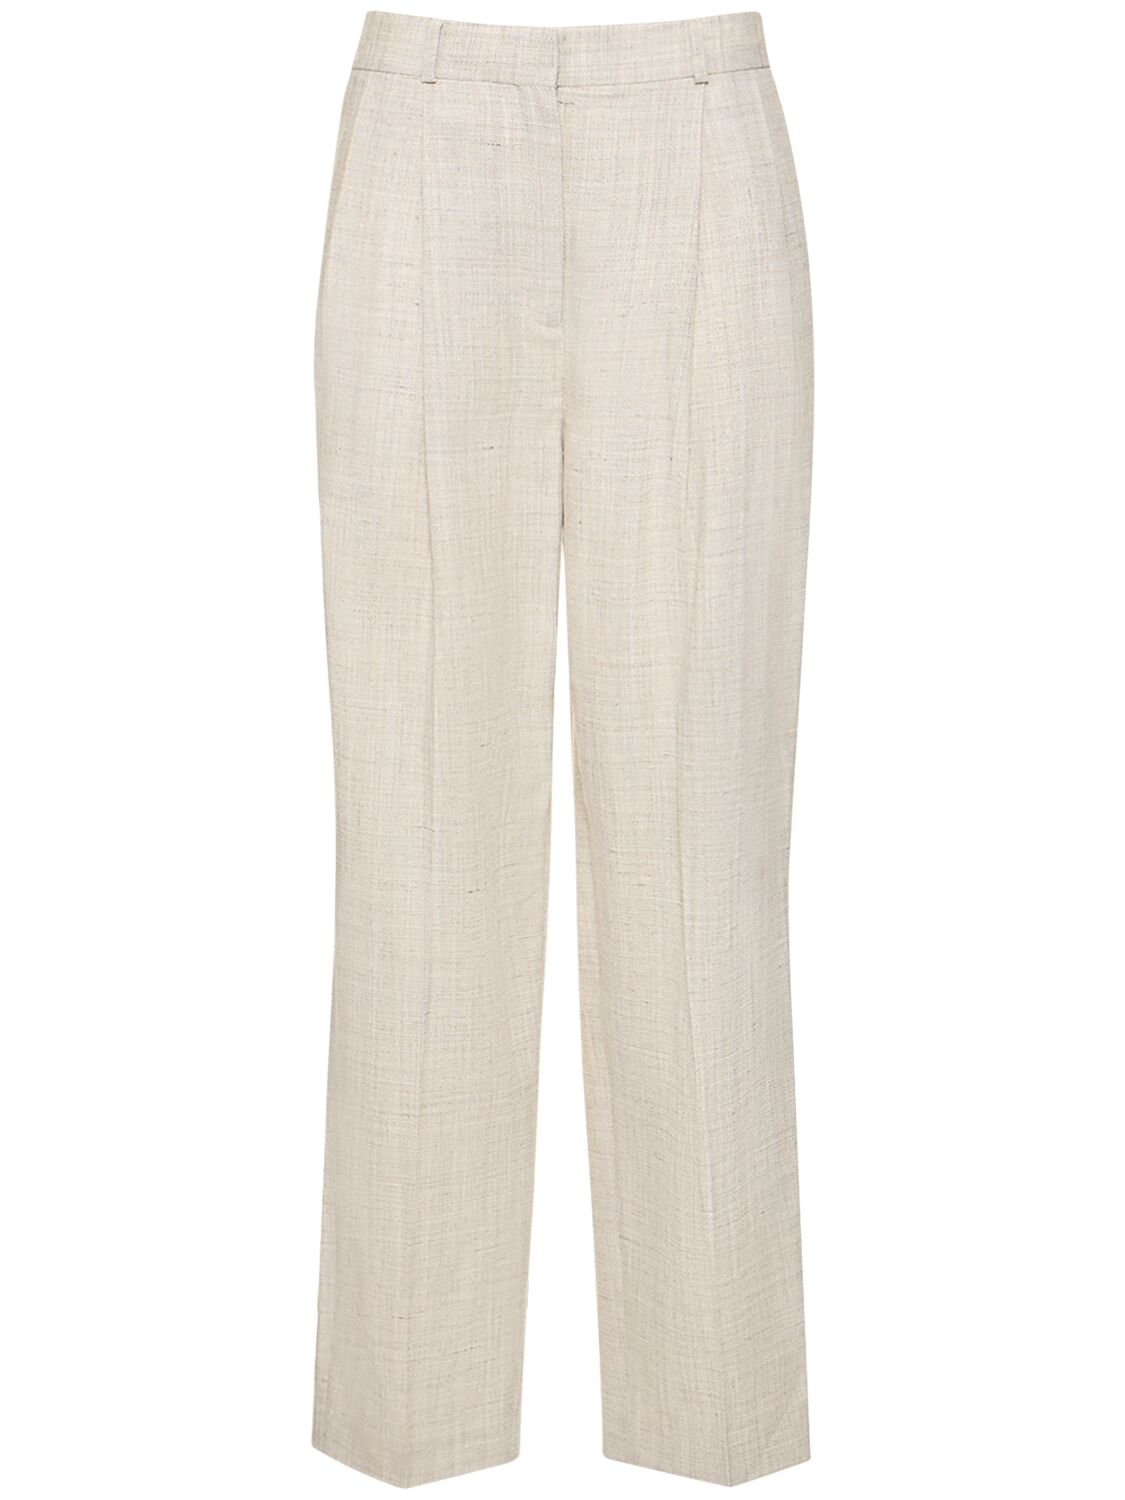 Image of Tailored Viscose Blend Pants